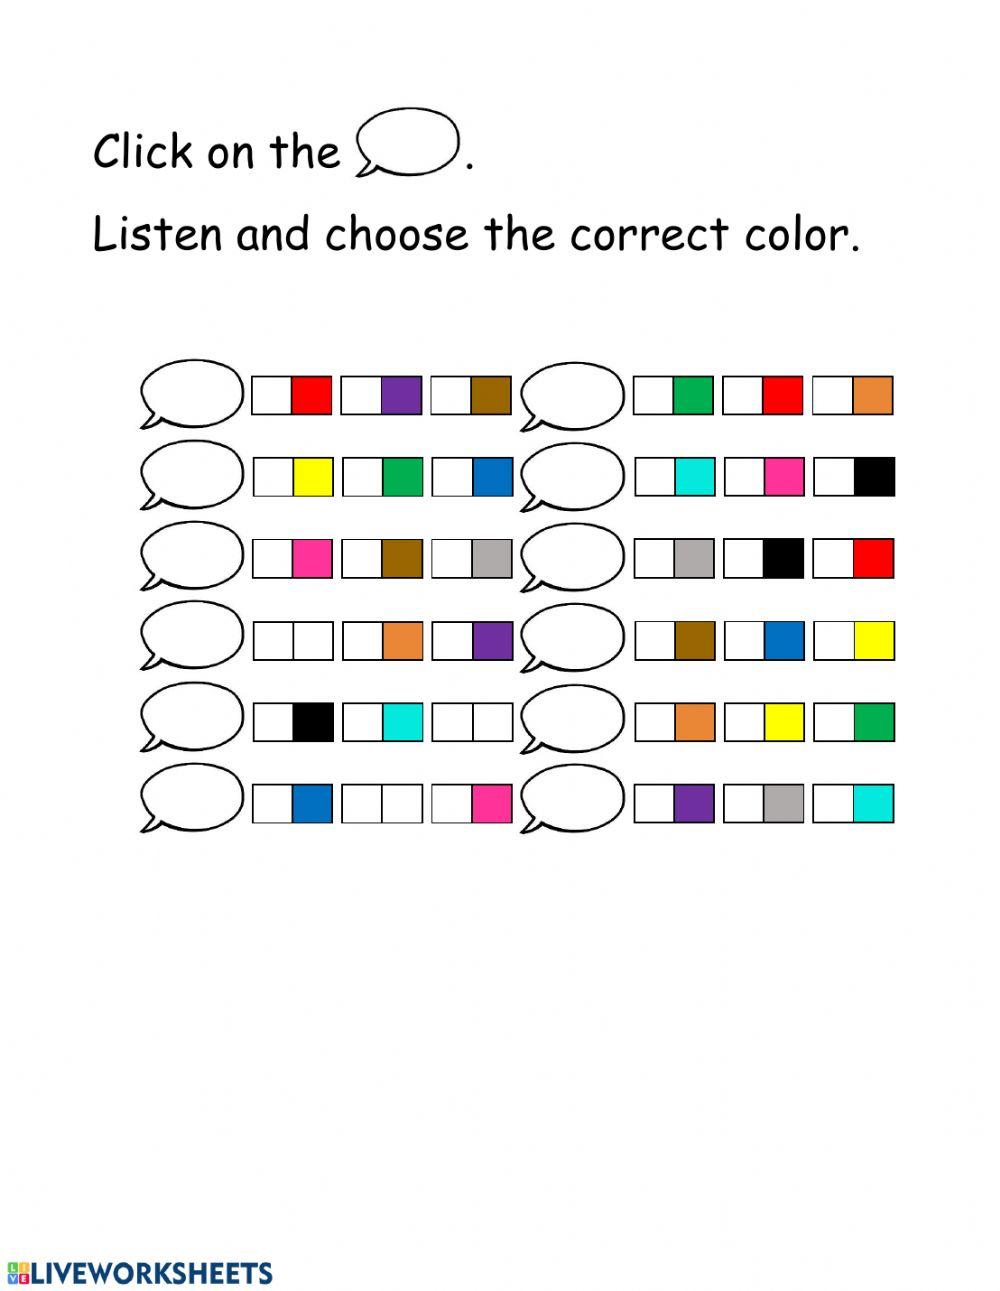 Listen and check the colors (2)